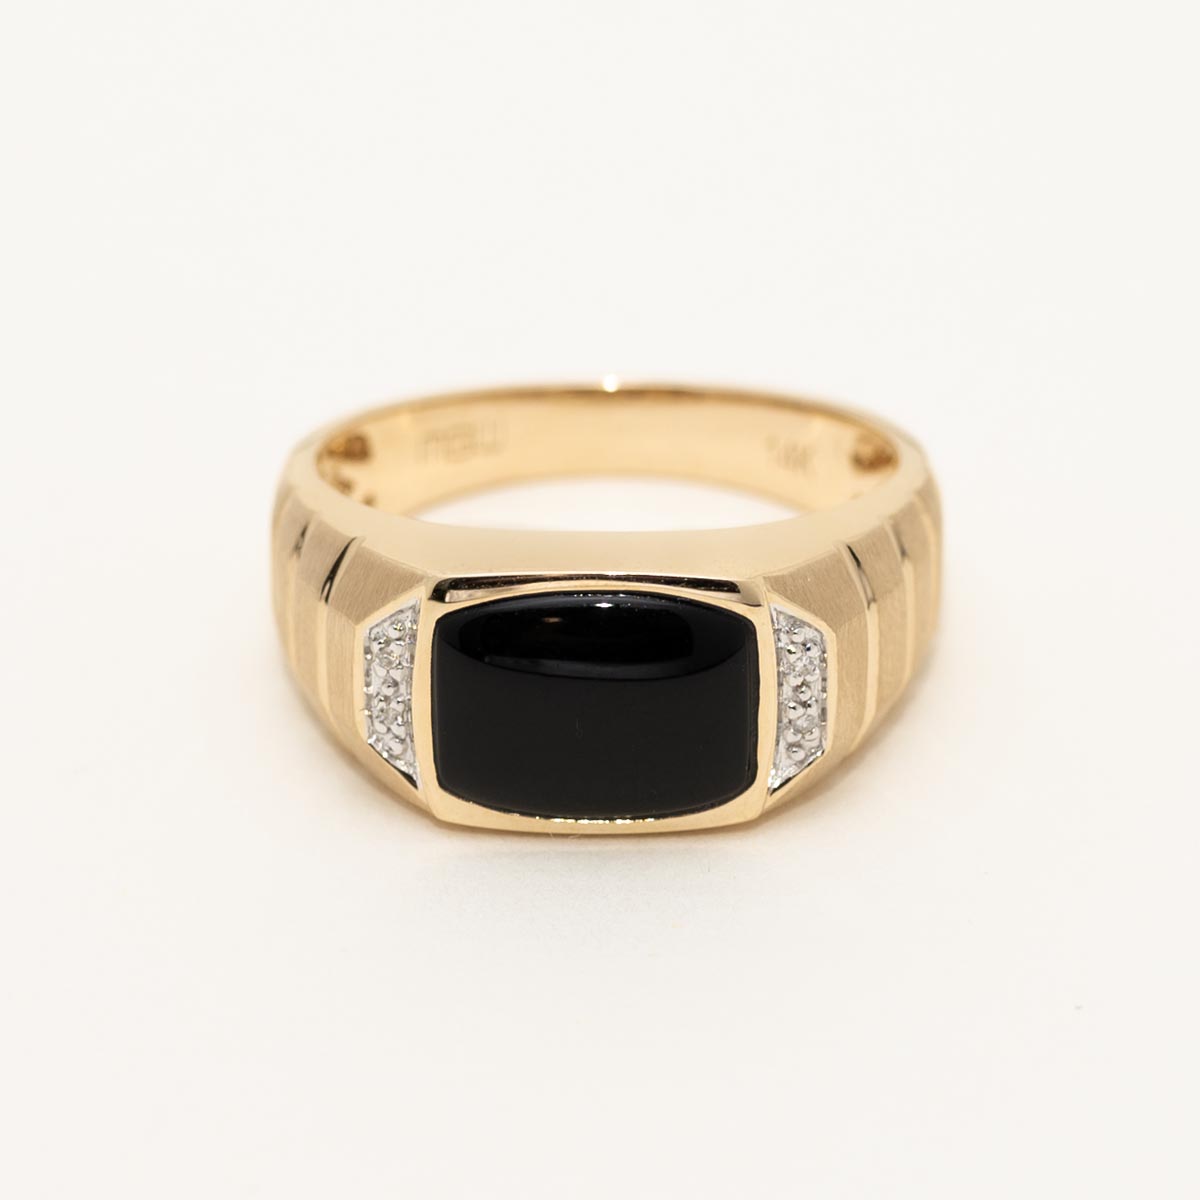 Mens Black Onyx Ring in 10kt Yellow Gold with Diamonds